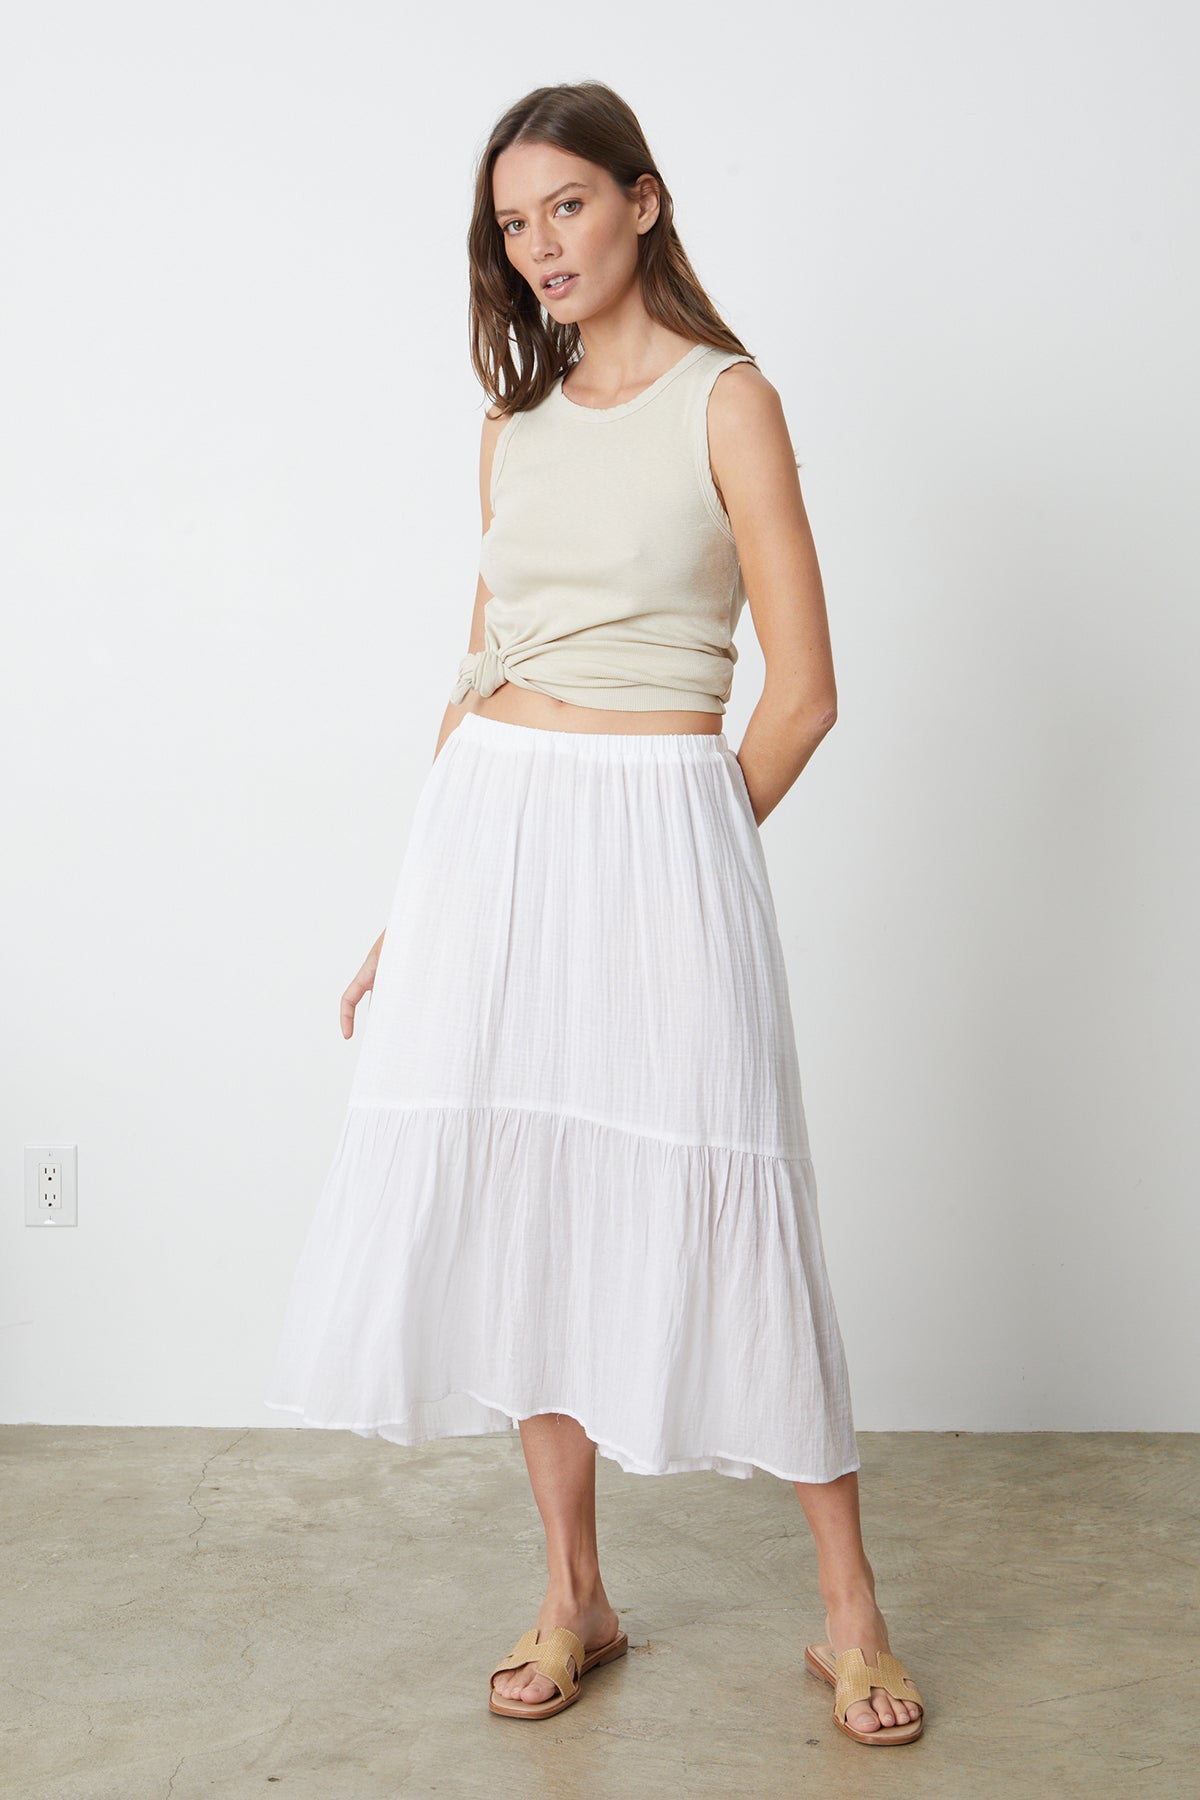 Mckenna Tiered Skirt in white with Aliza tank in gravel tied with knot to show waist full length front-26255713599681